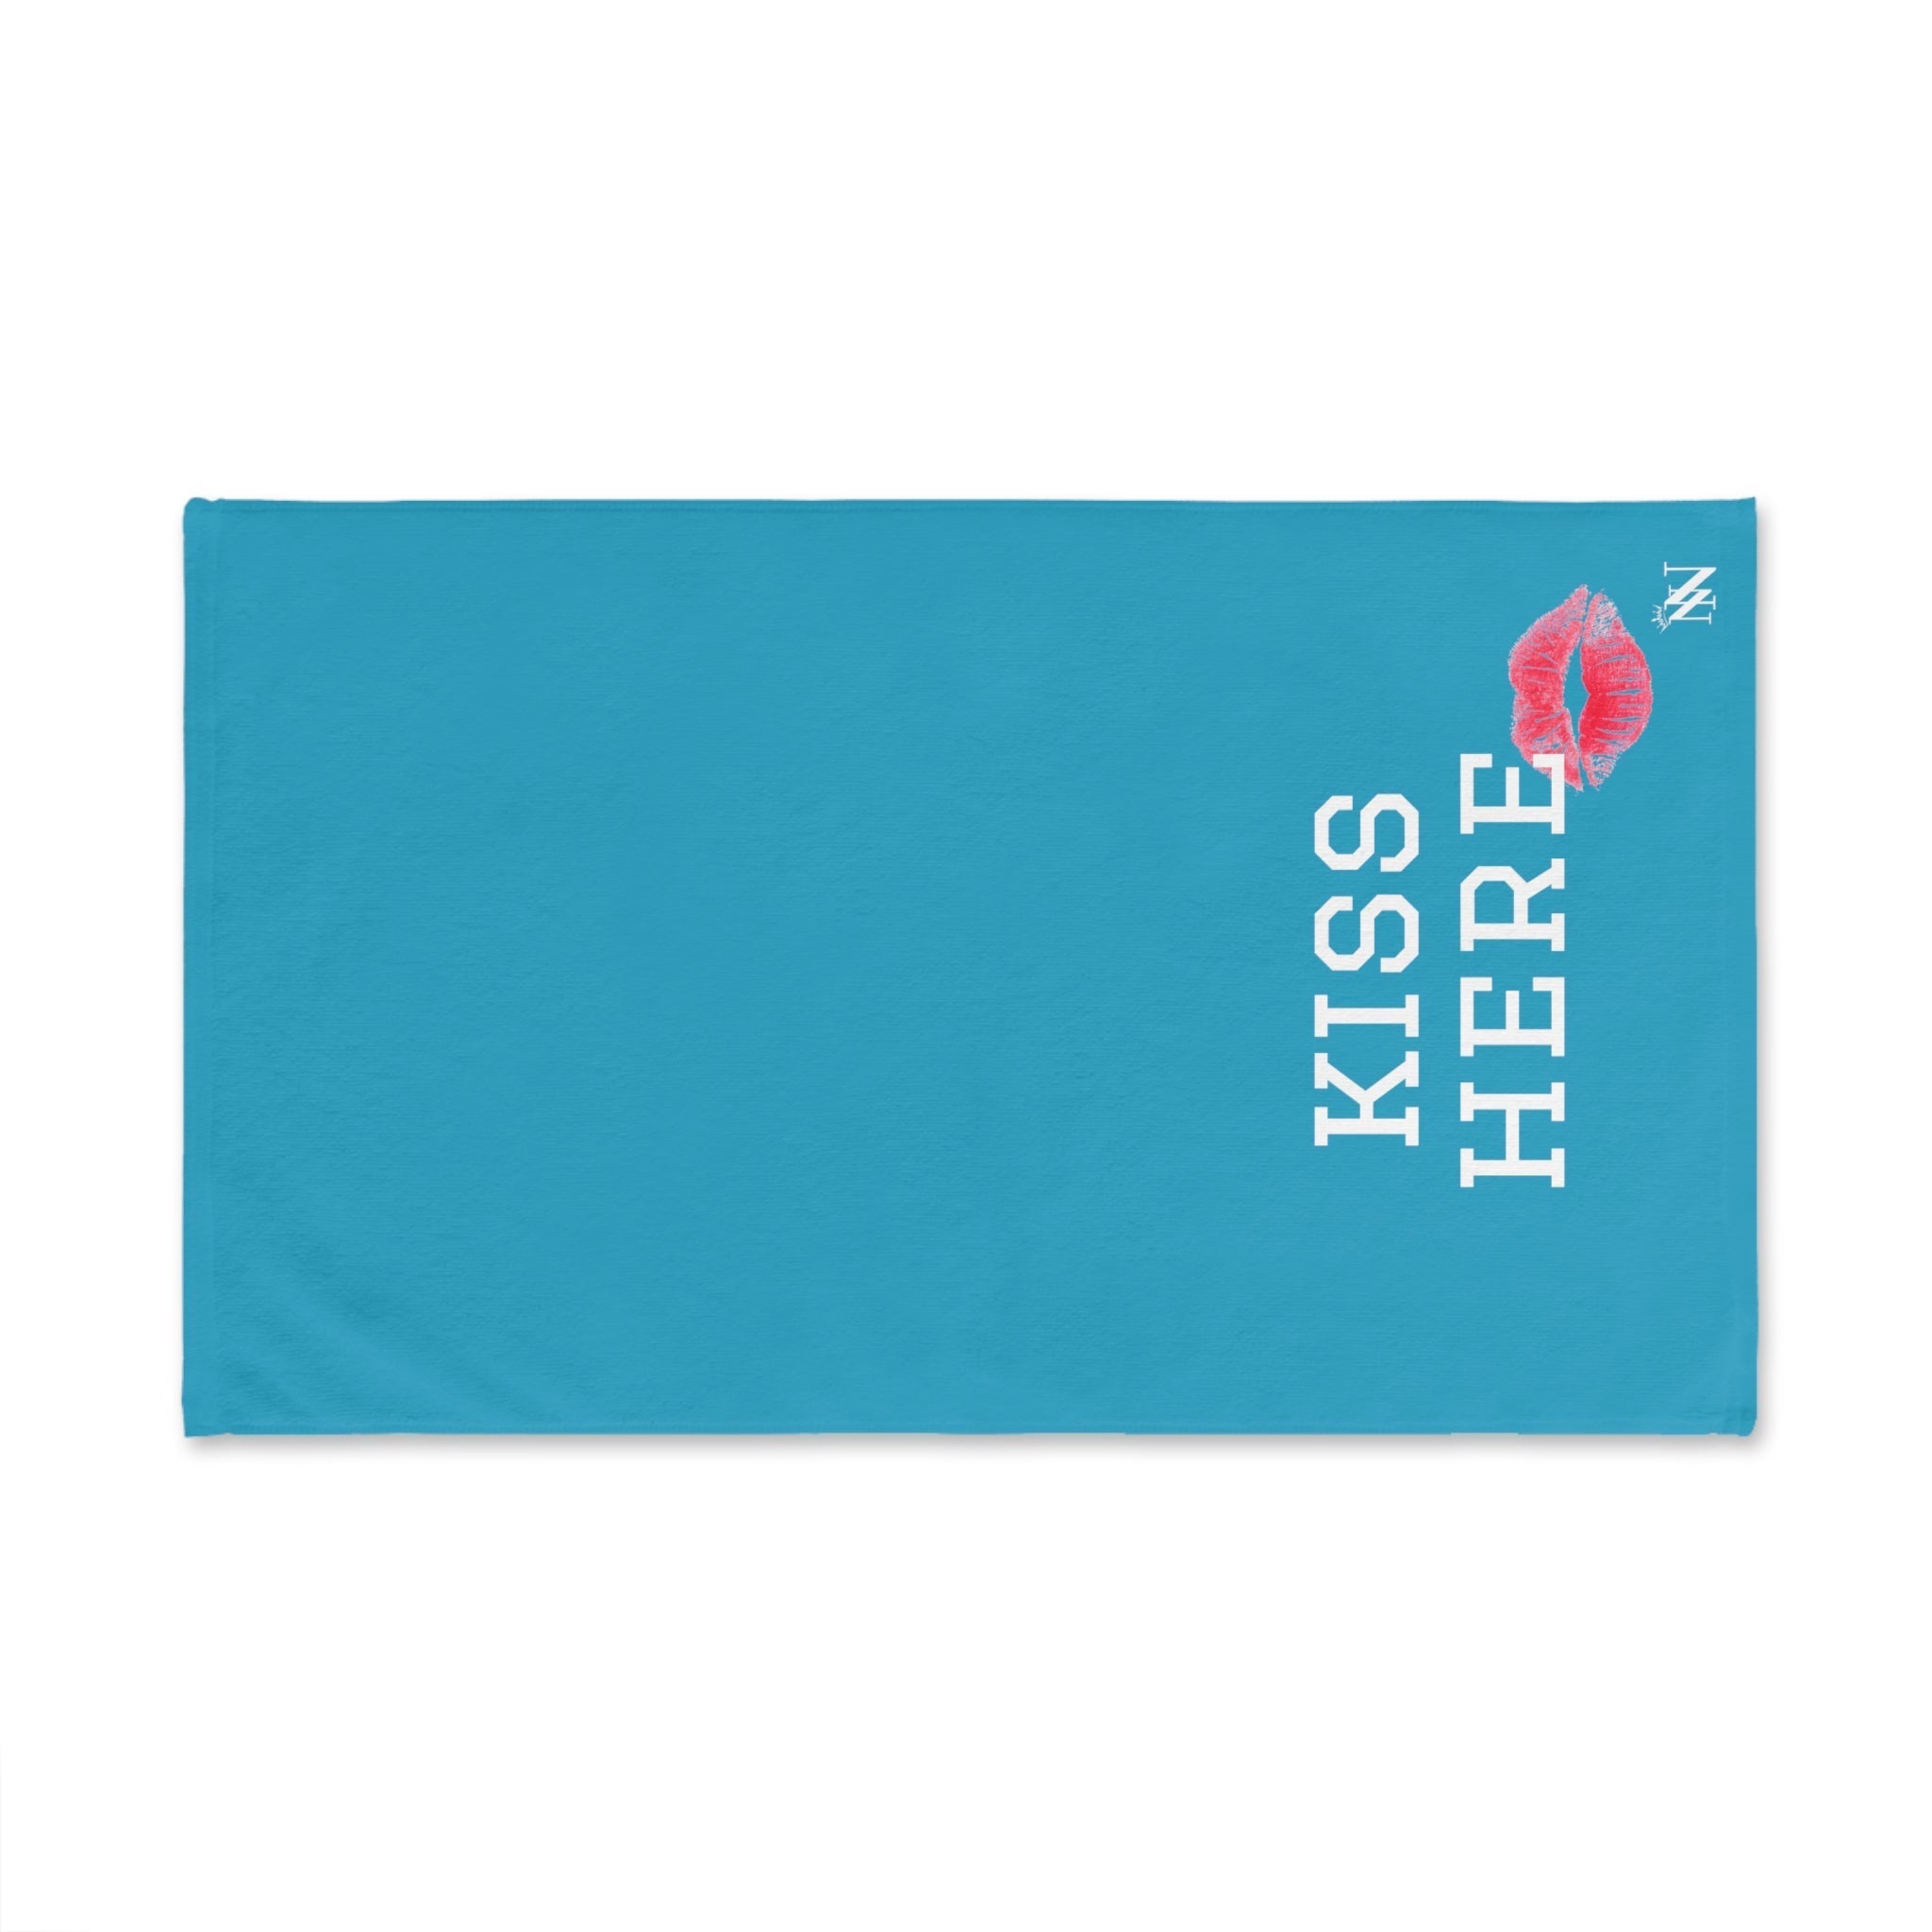 Kiss Here Lips Teal | Novelty Gifts for Boyfriend, Funny Towel Romantic Gift for Wedding Couple Fiance First Year Anniversary Valentines, Party Gag Gifts, Joke Humor Cloth for Husband Men BF NECTAR NAPKINS